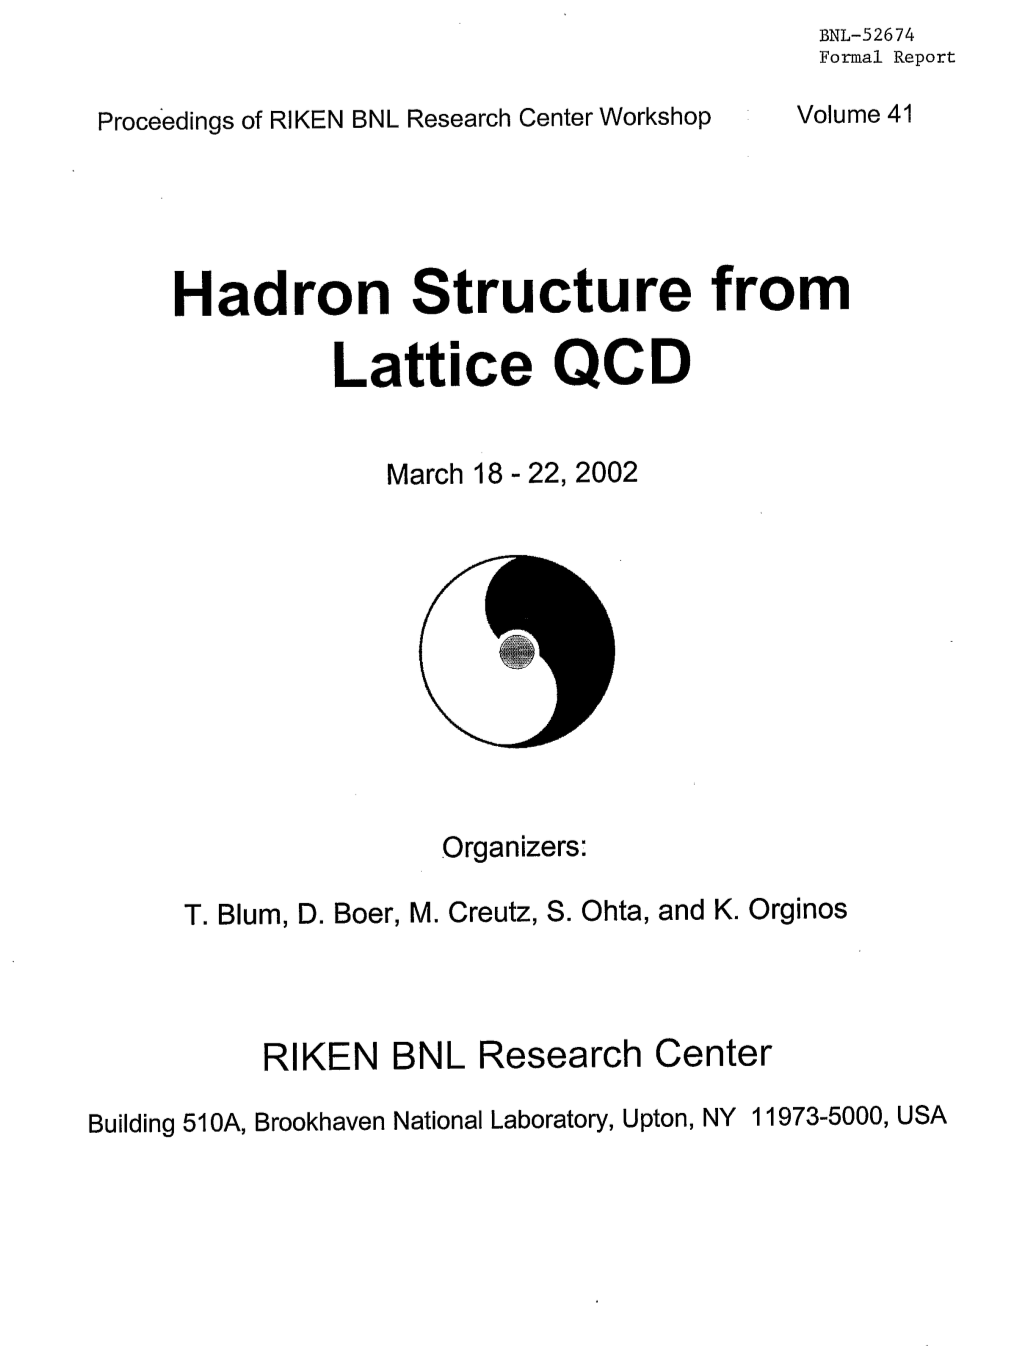 Hadron Structure from Lattice QCD